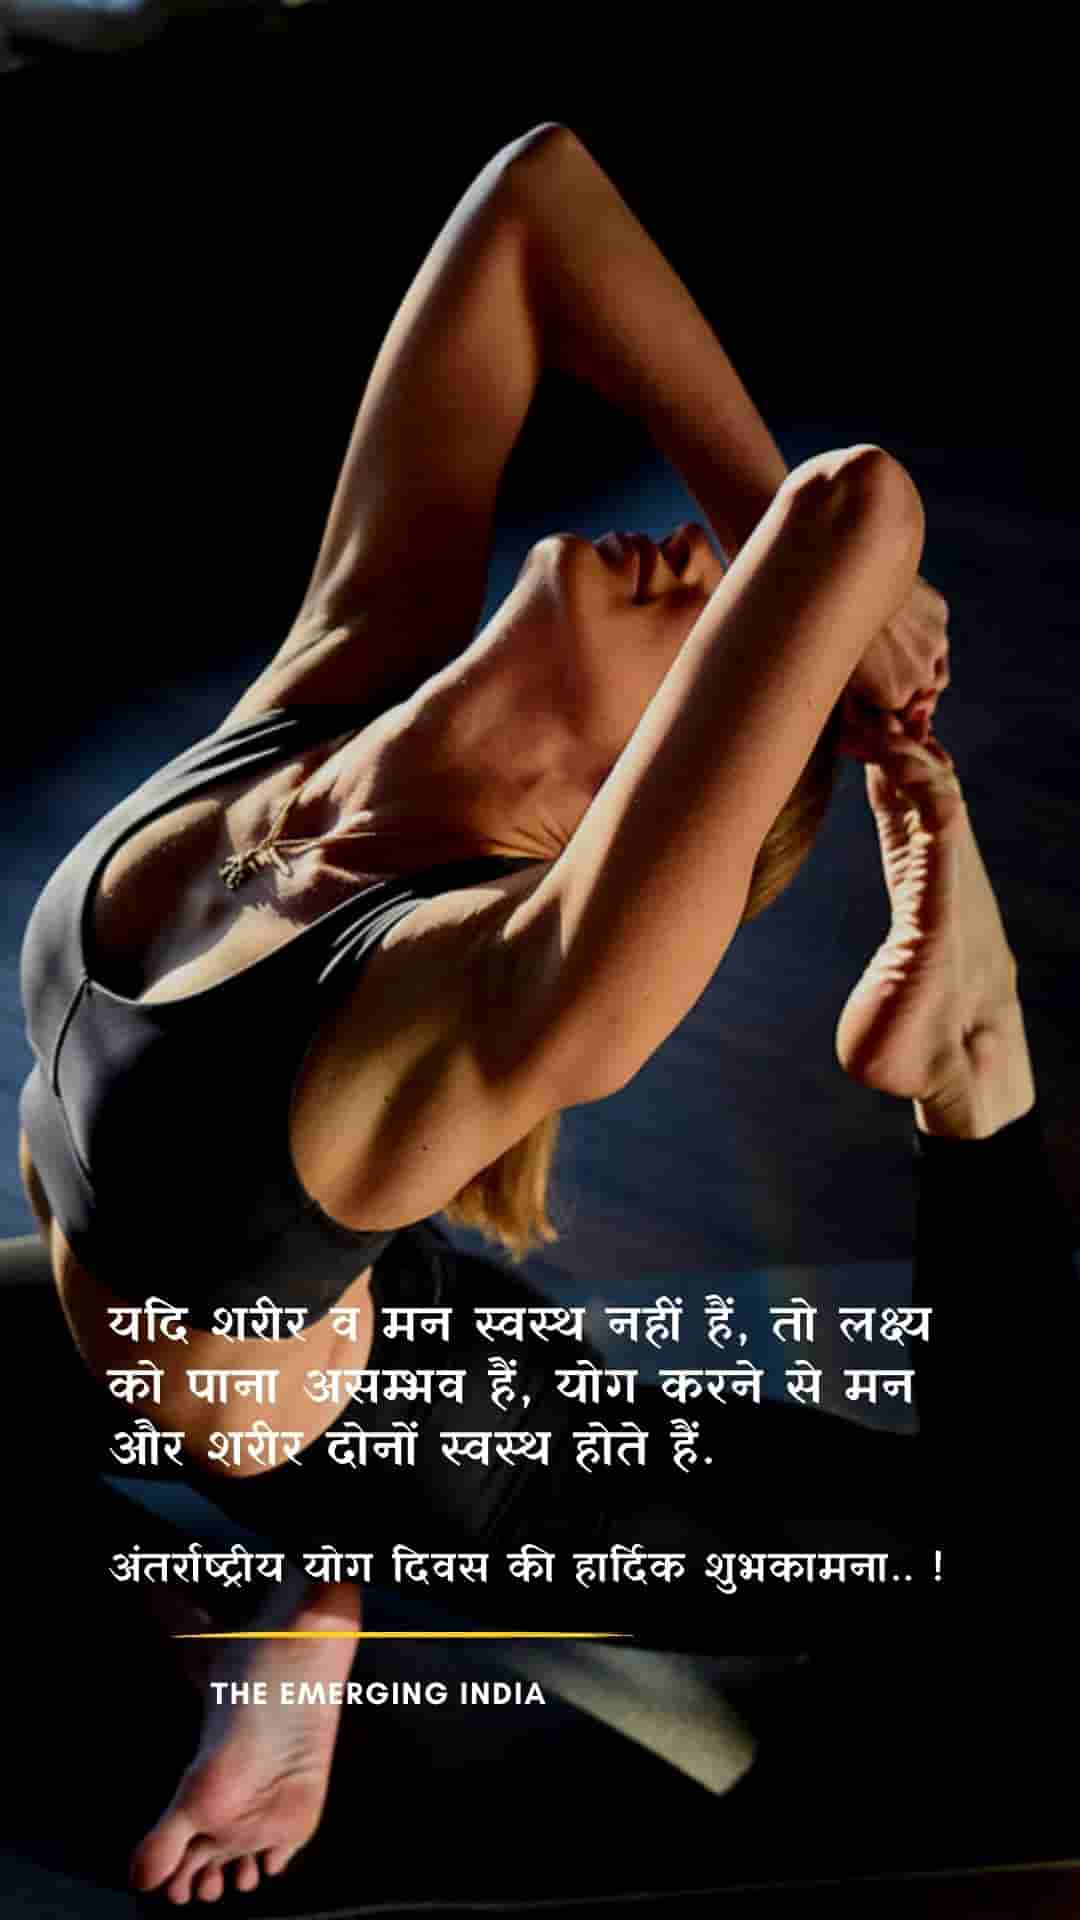 yoga day, whastapp images of yoga day, wishes for yoga day, yoga day wishes, yoga day quotes